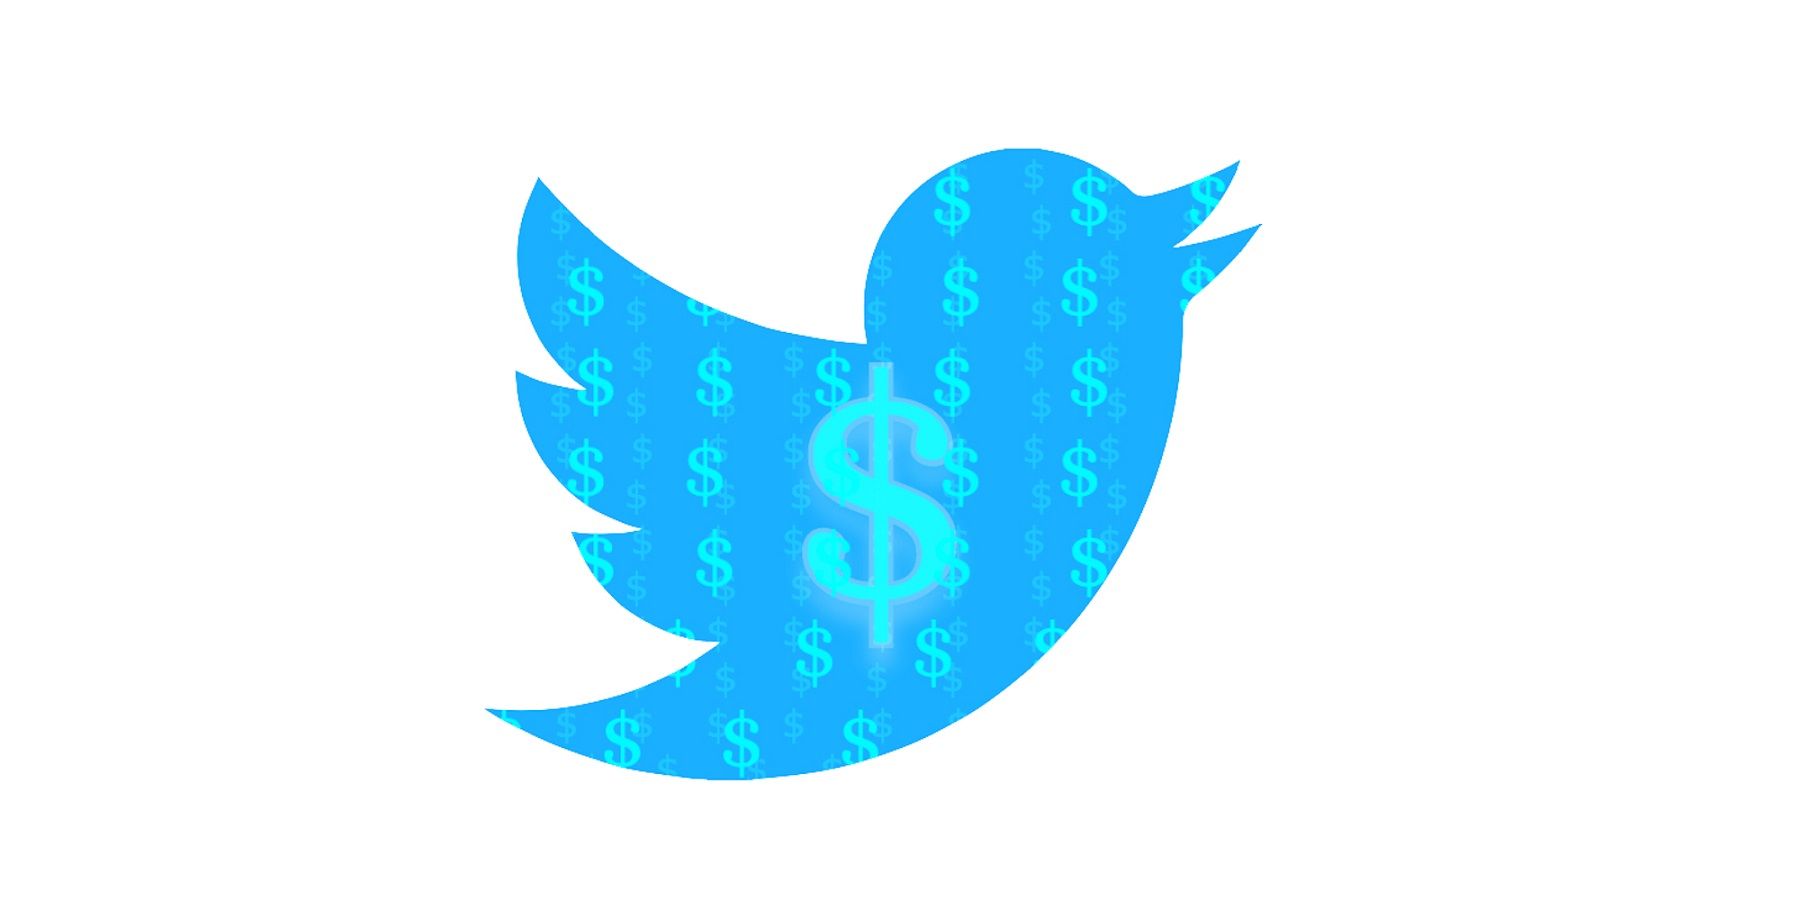 Twitter Confirms Subscription Possibility & Tests Could Start This Year